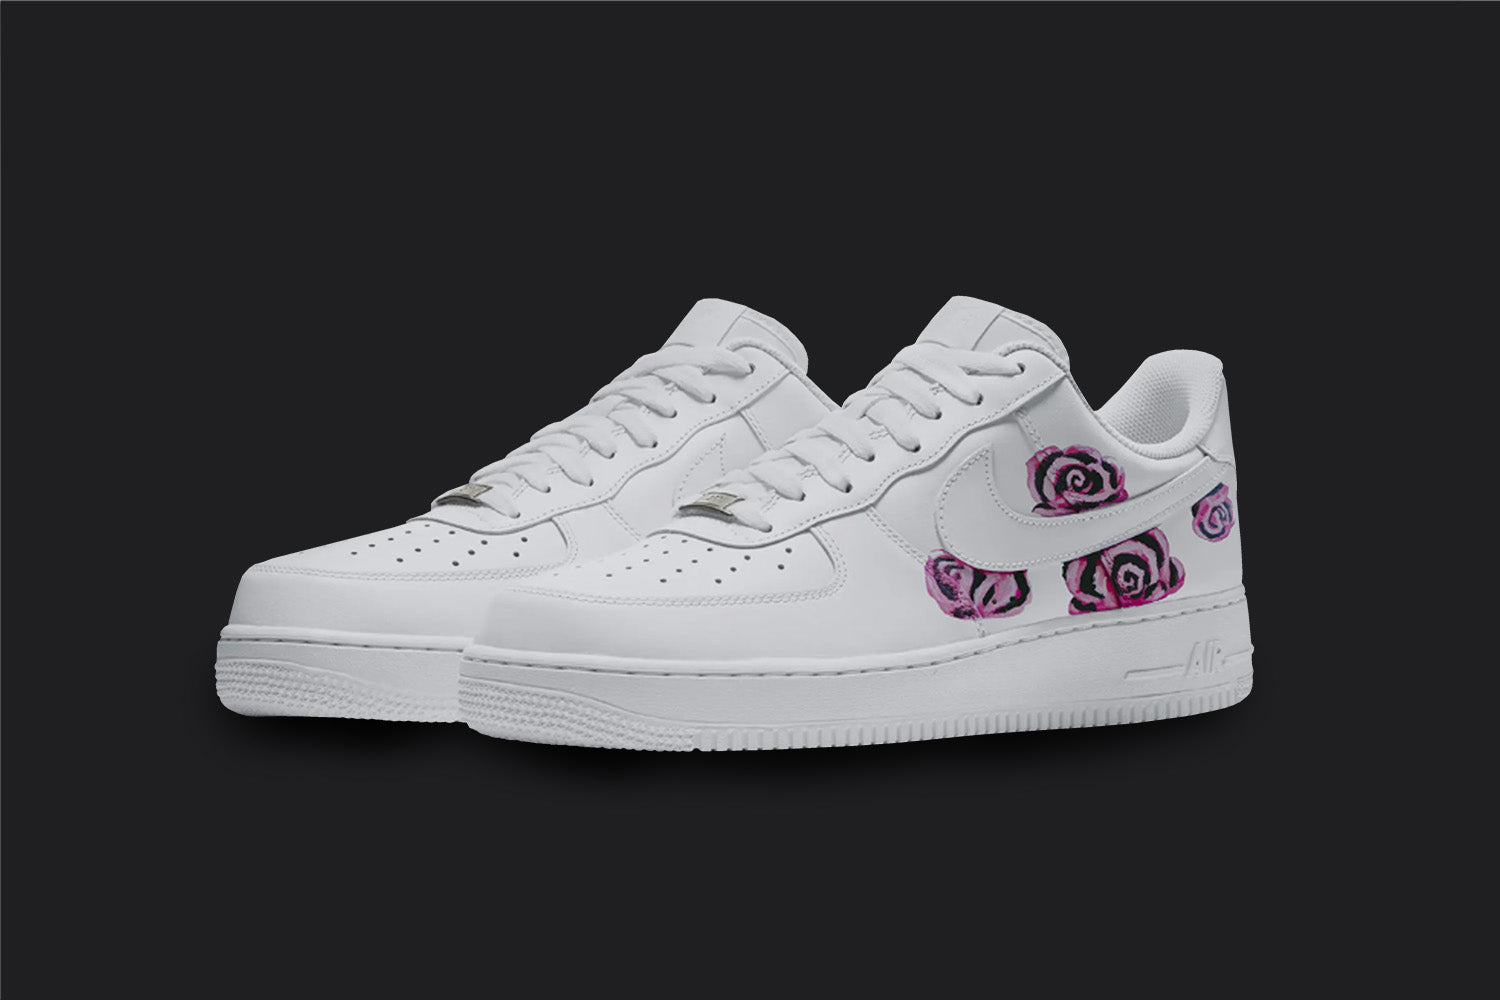 The image is of a Custom Nike Air force 1 sneaker pair on a blank black background. The white custom sneakers have 4 pink roses design on the sides. 